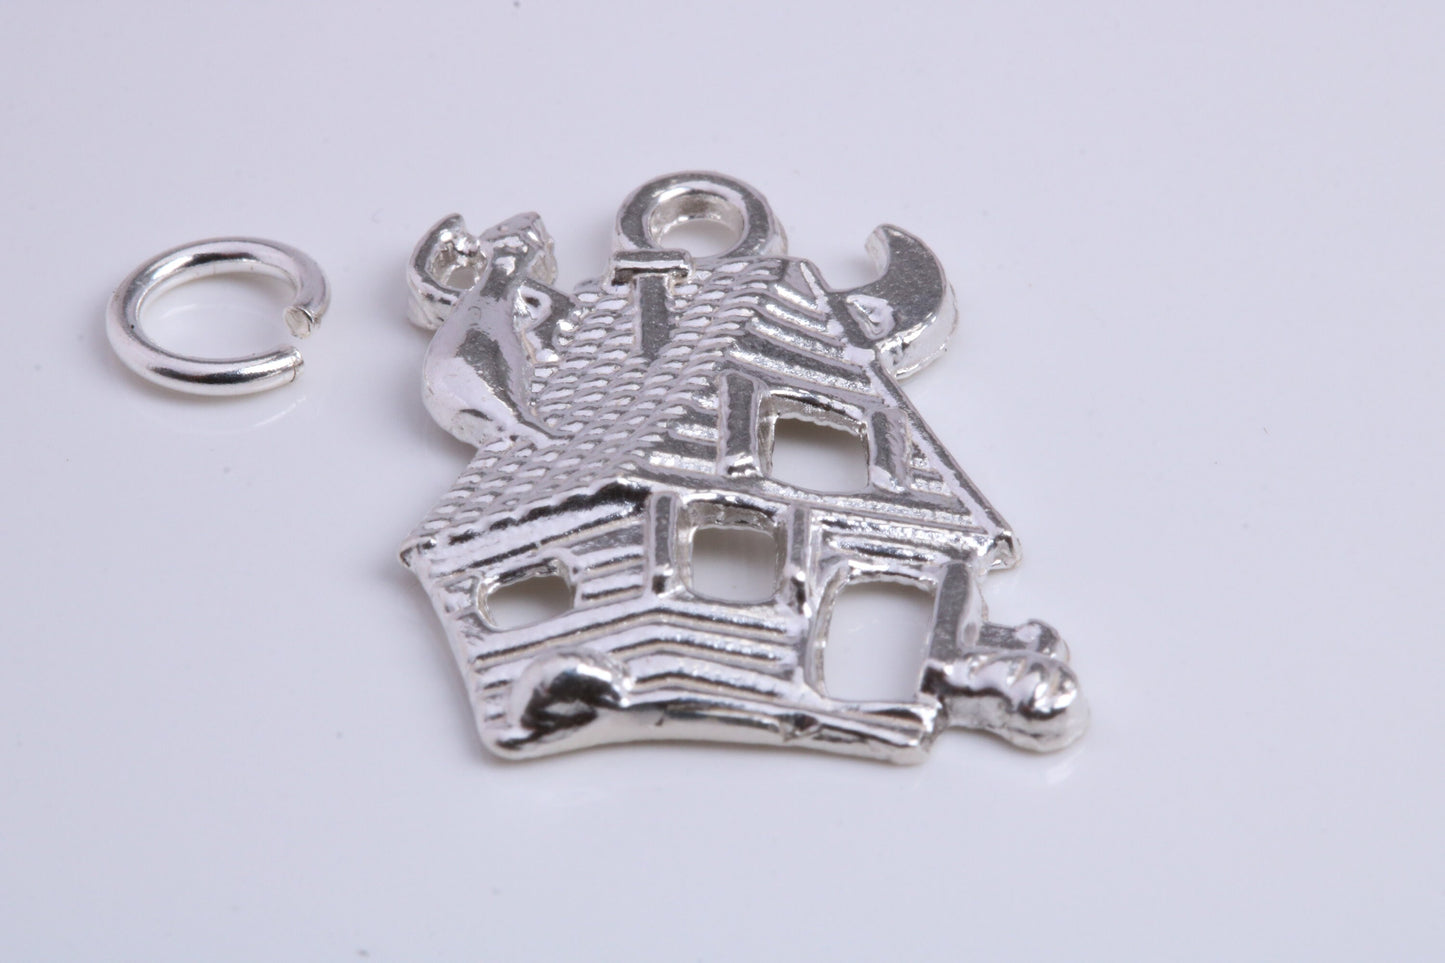 Haunted House Charm, Traditional Charm, Made from Solid 925 Grade Sterling Silver, Complete with Attachment Link